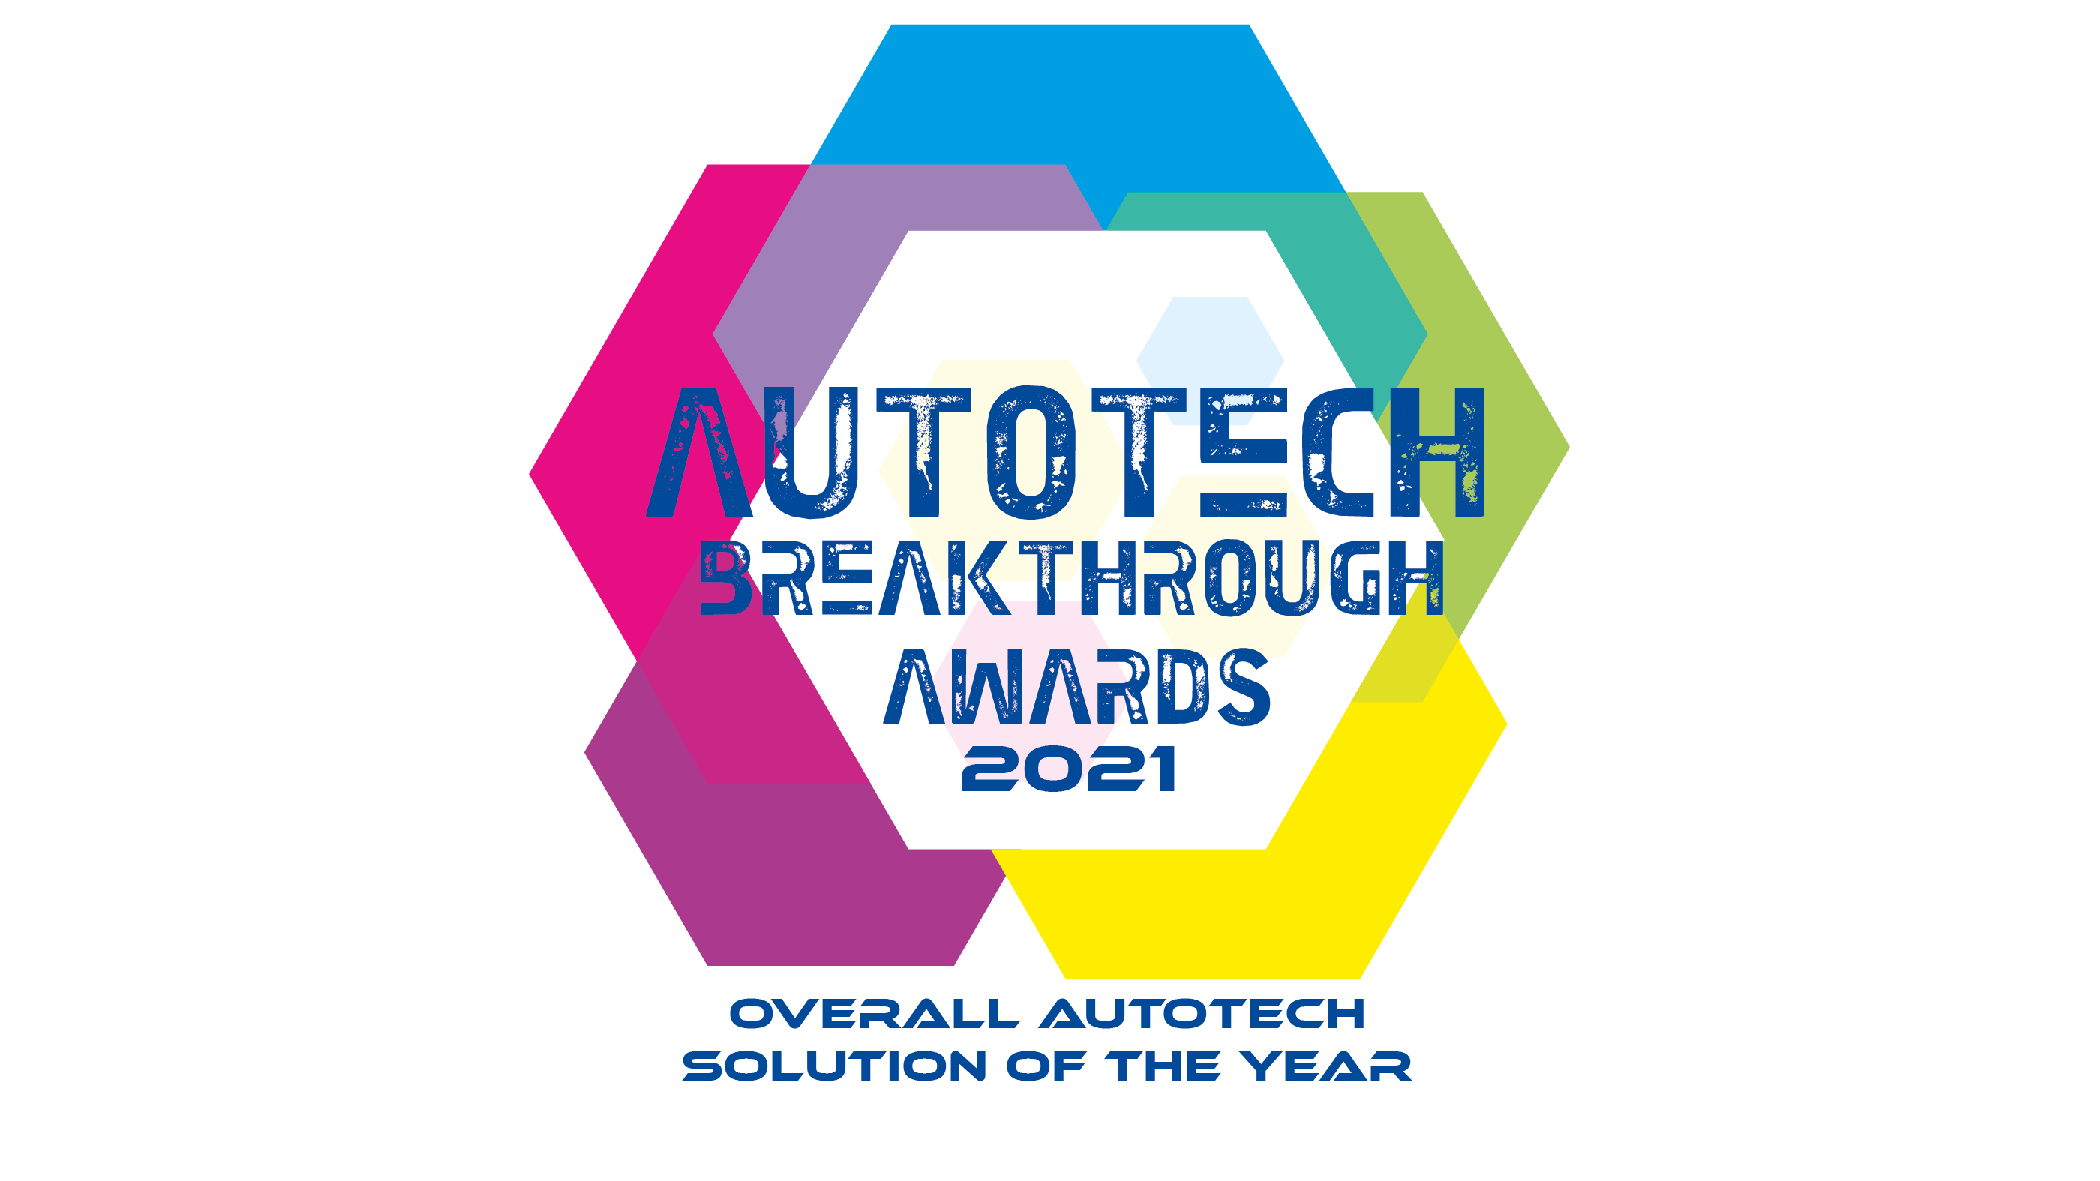 Aurora Labs’ Vehicle Software Intelligence named “Overall AutoTech Solution of the Year”